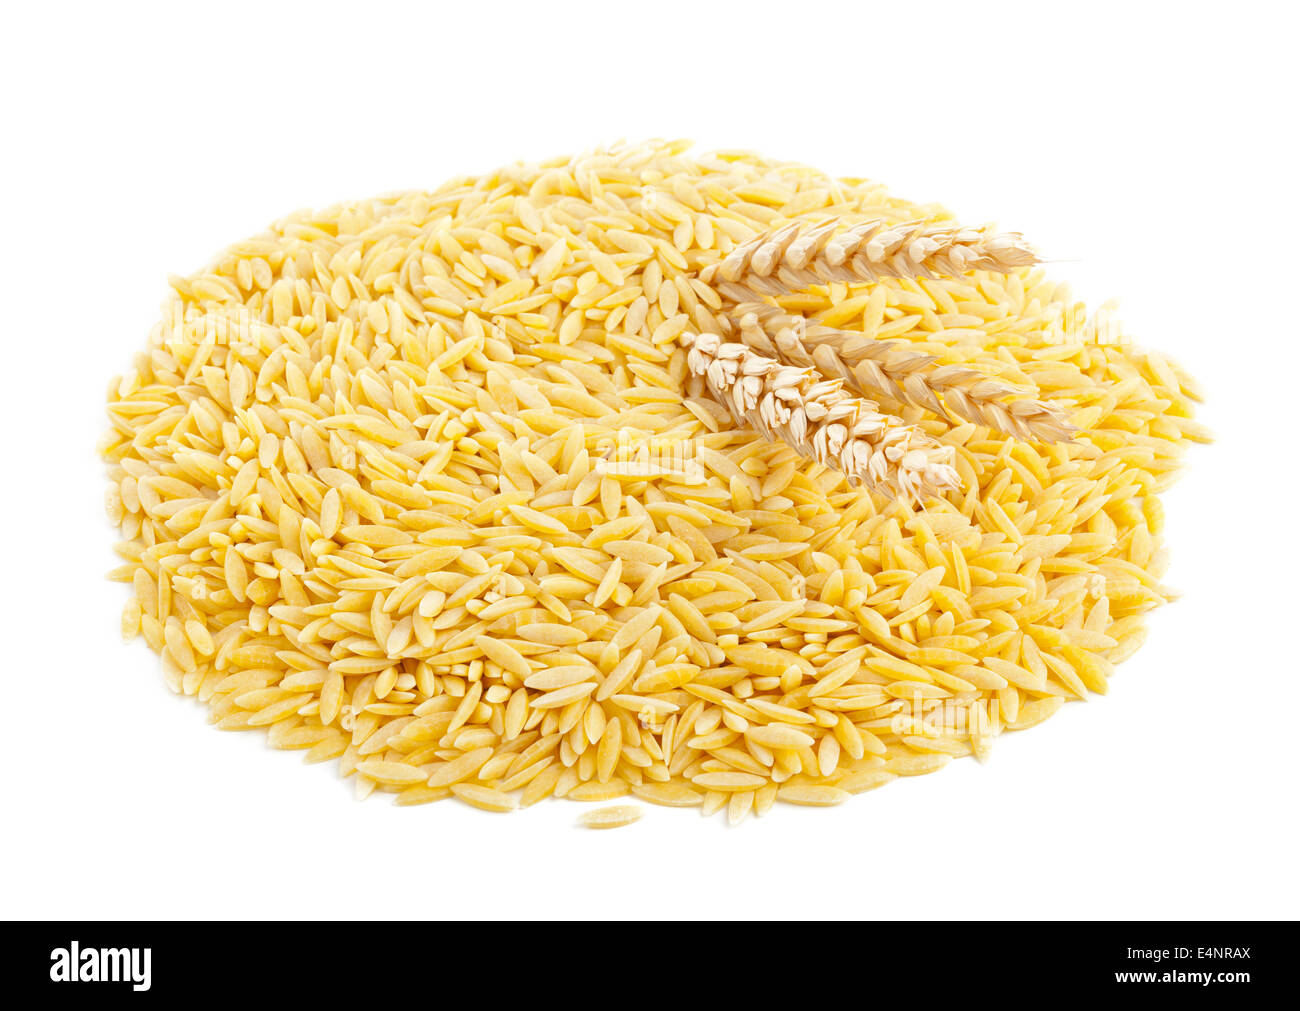 Heap of dried durum wheat, also hard wheat or macaroni wheat, with wheat ears over white background Stock Photo